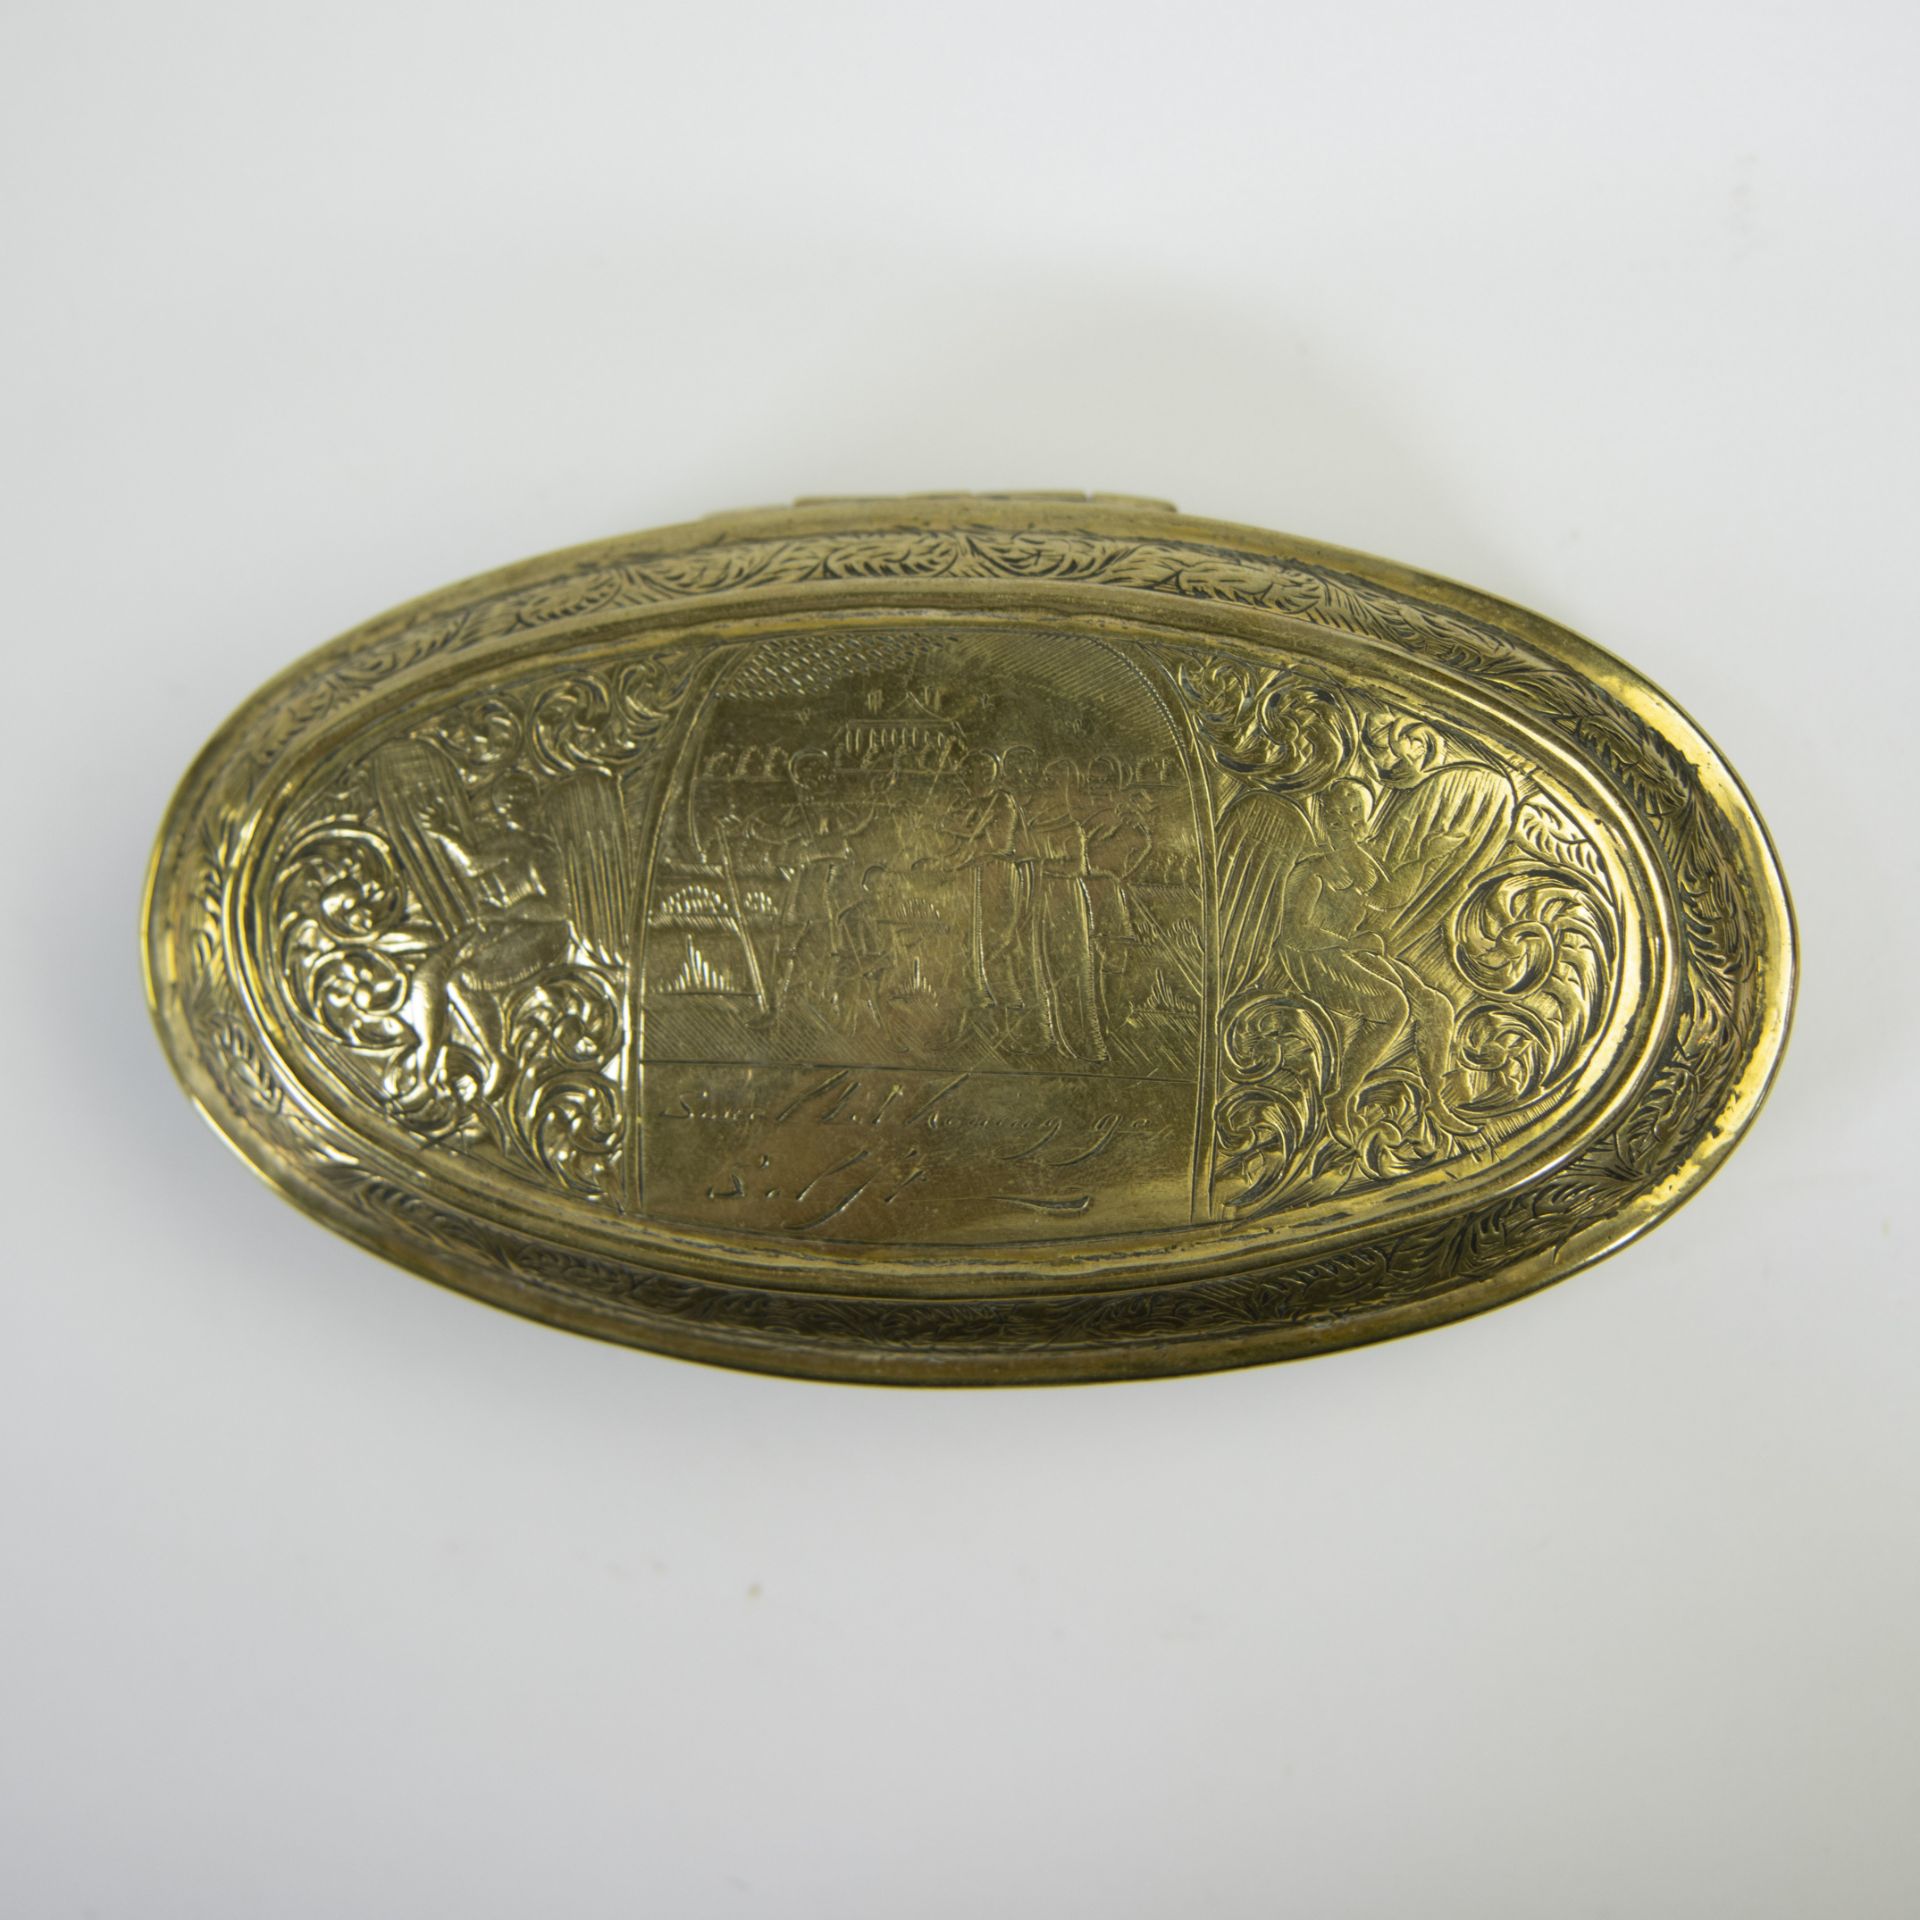 12 pewter plates and gilt tobacco box - Image 5 of 5